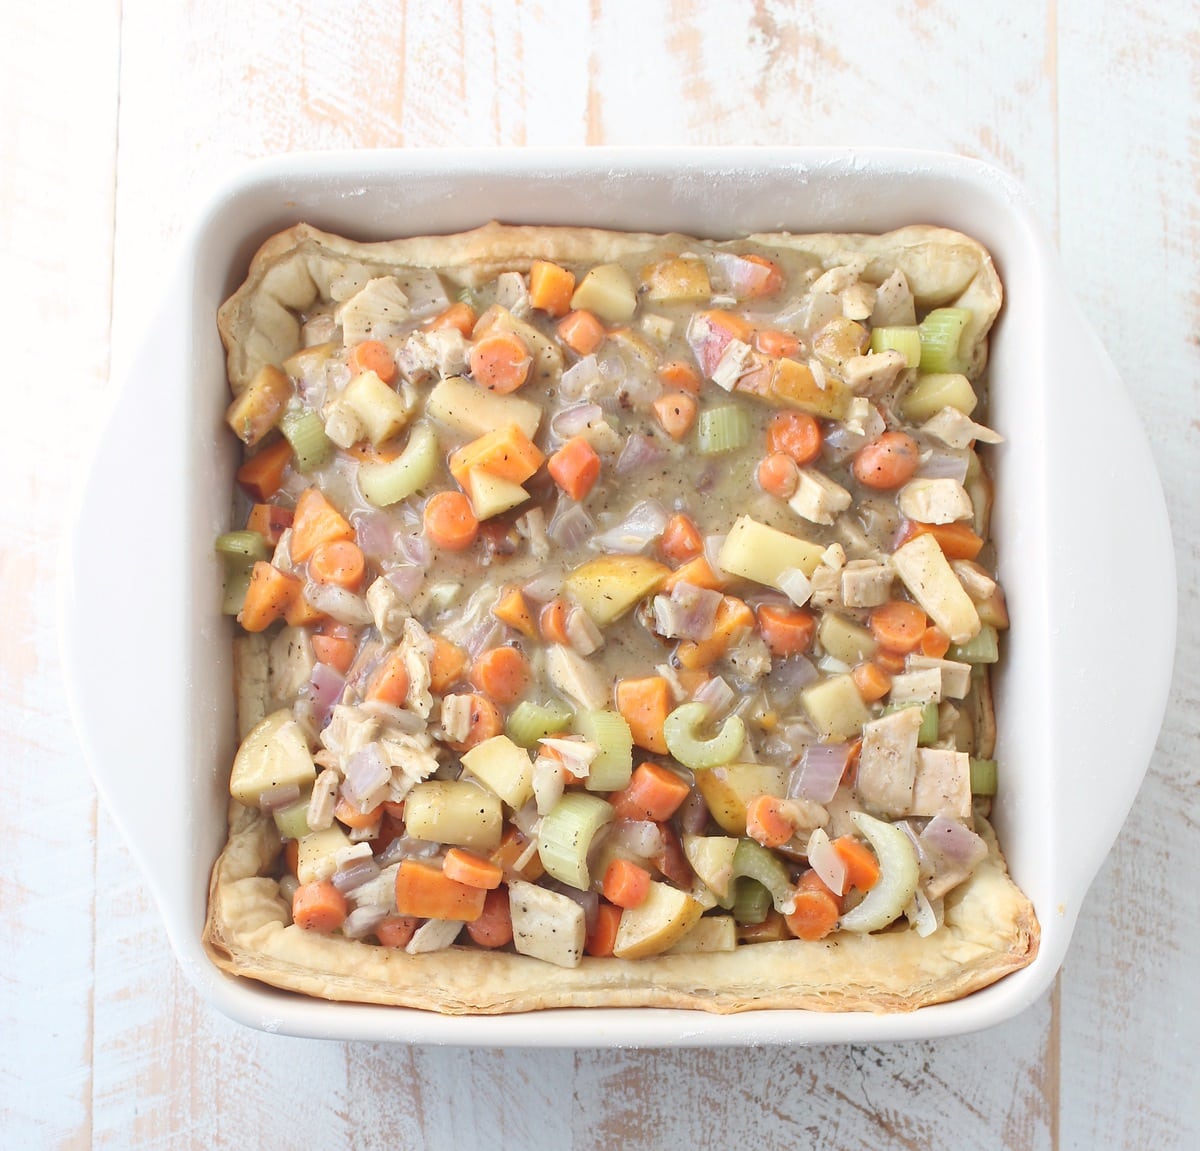 Turkey Pot Pie with Puff Pastry Crust is a delicious comfort food recipe anytime of the year, but is perfect for using up leftover turkey from Thanksgiving!